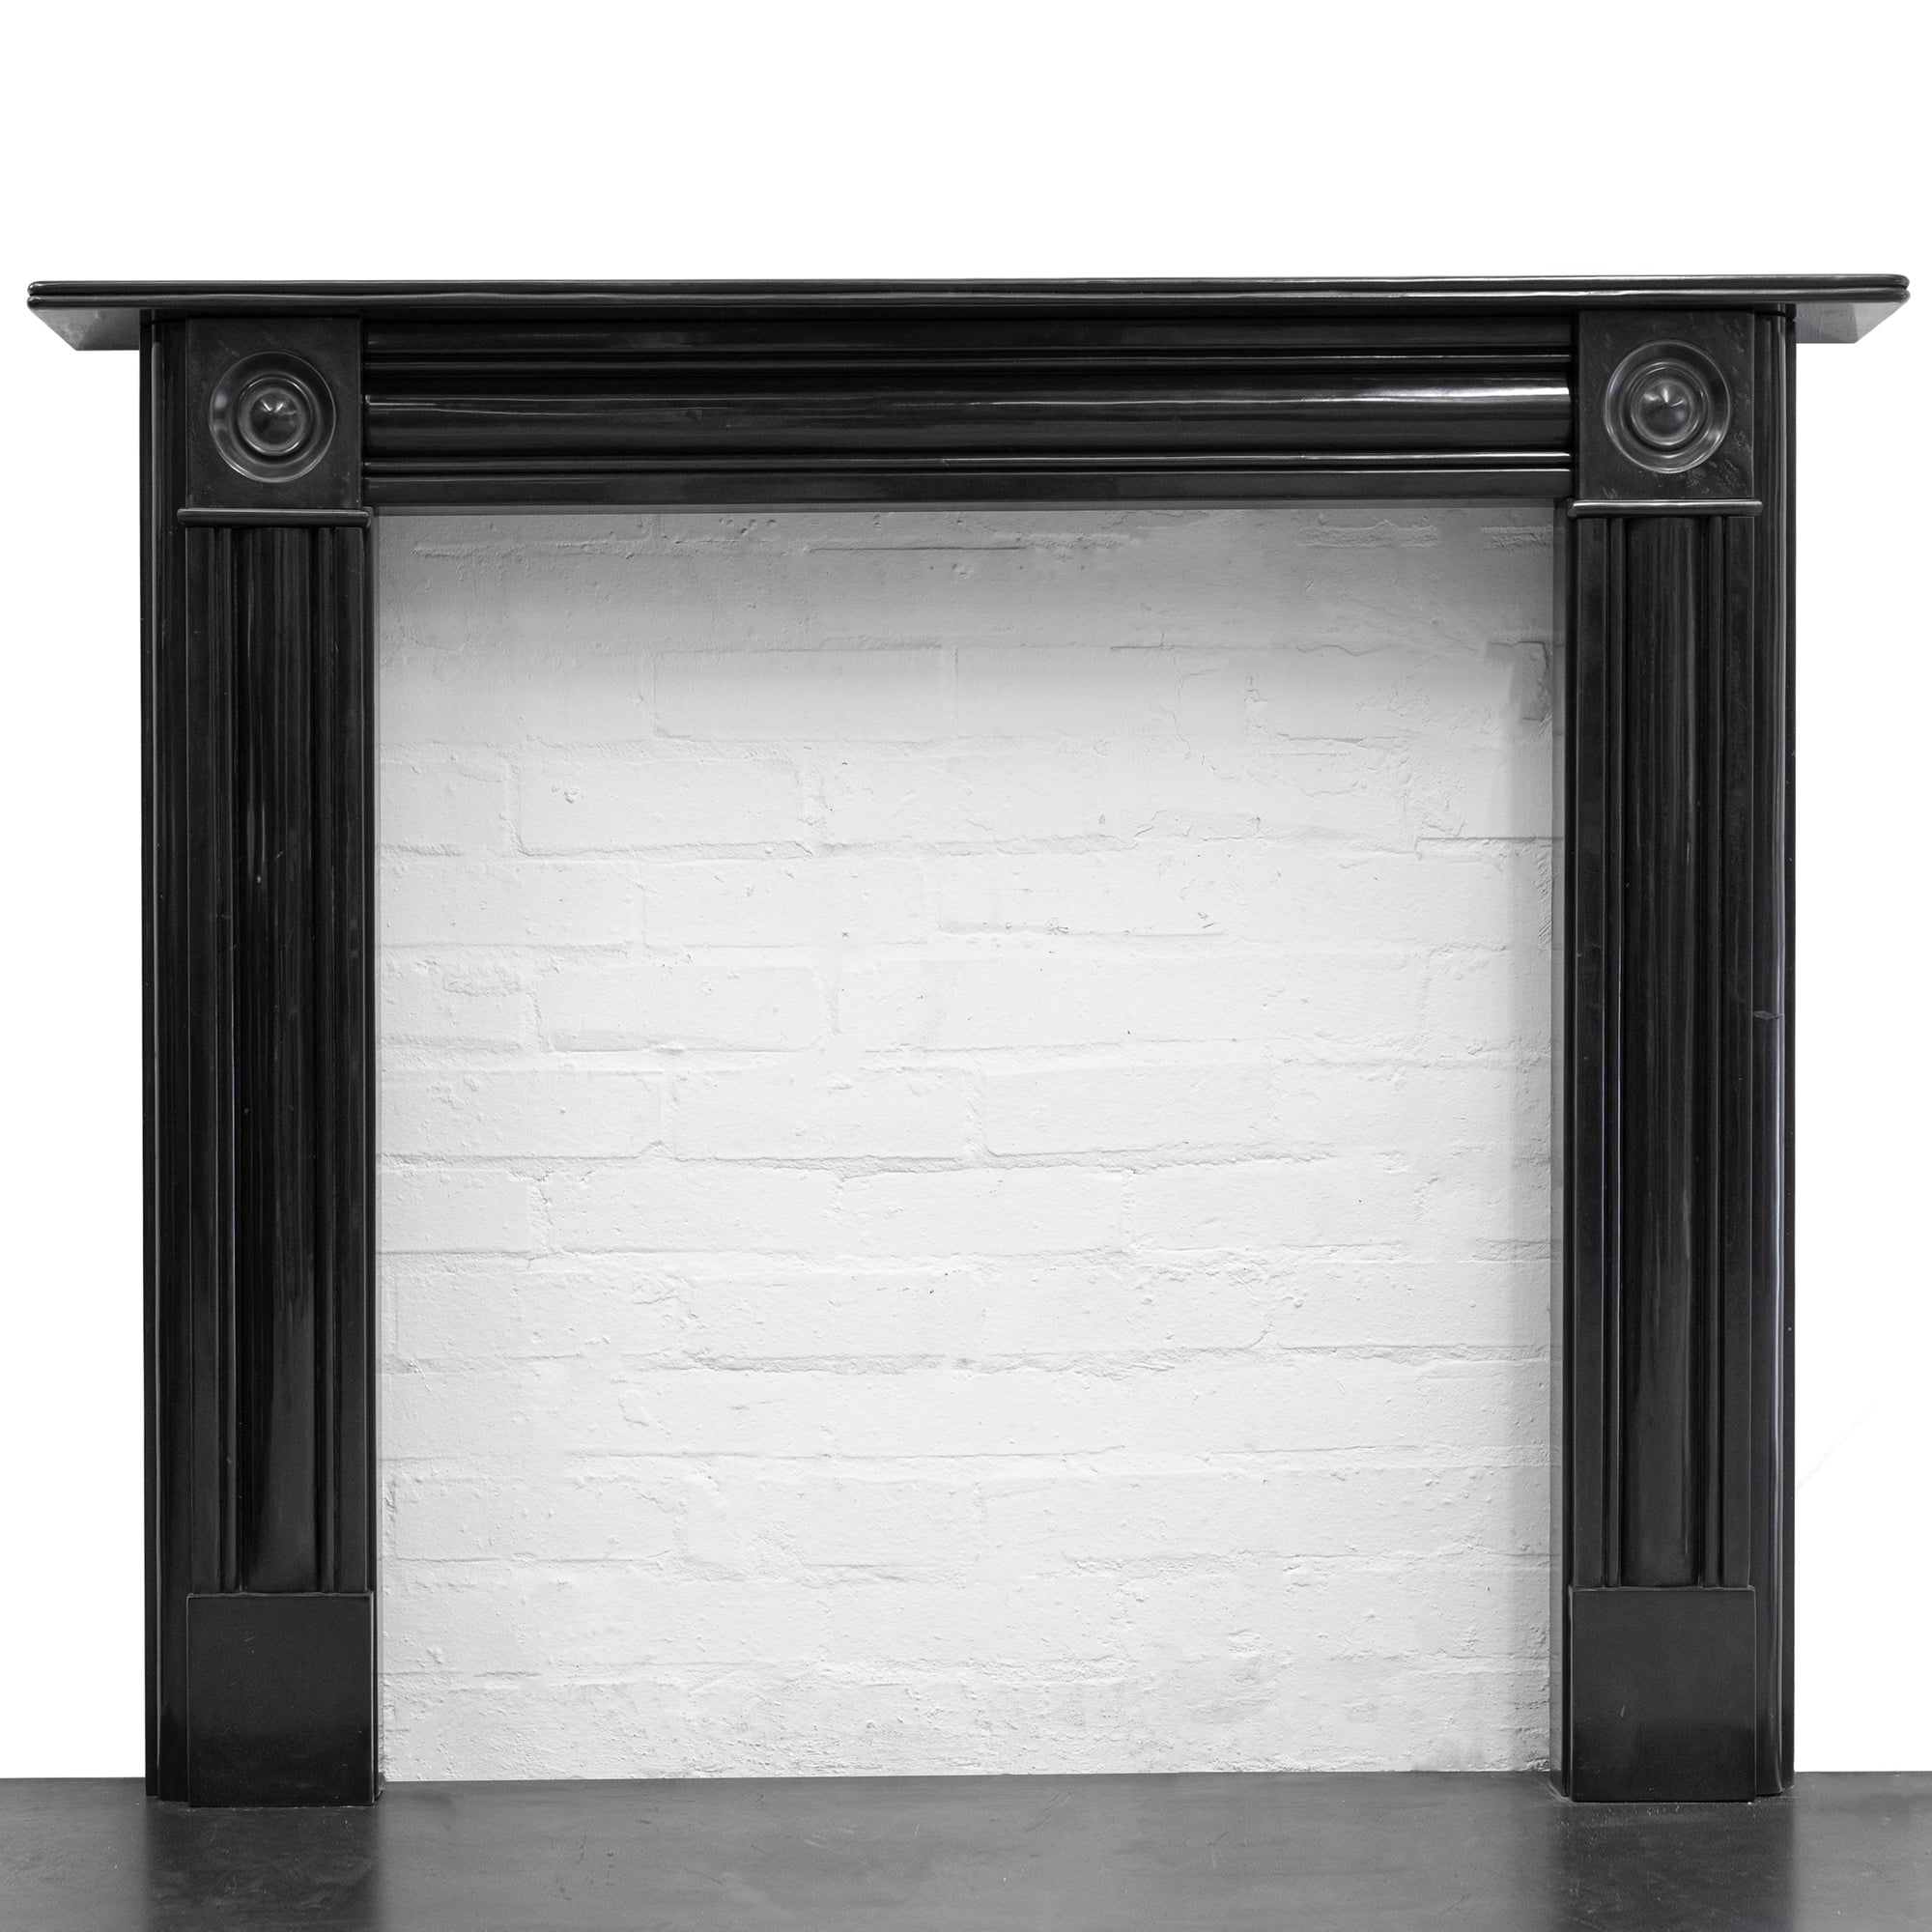 Reclaimed Early Georgian Style Belgian Black Marble Fire Surround | The Architectural Forum